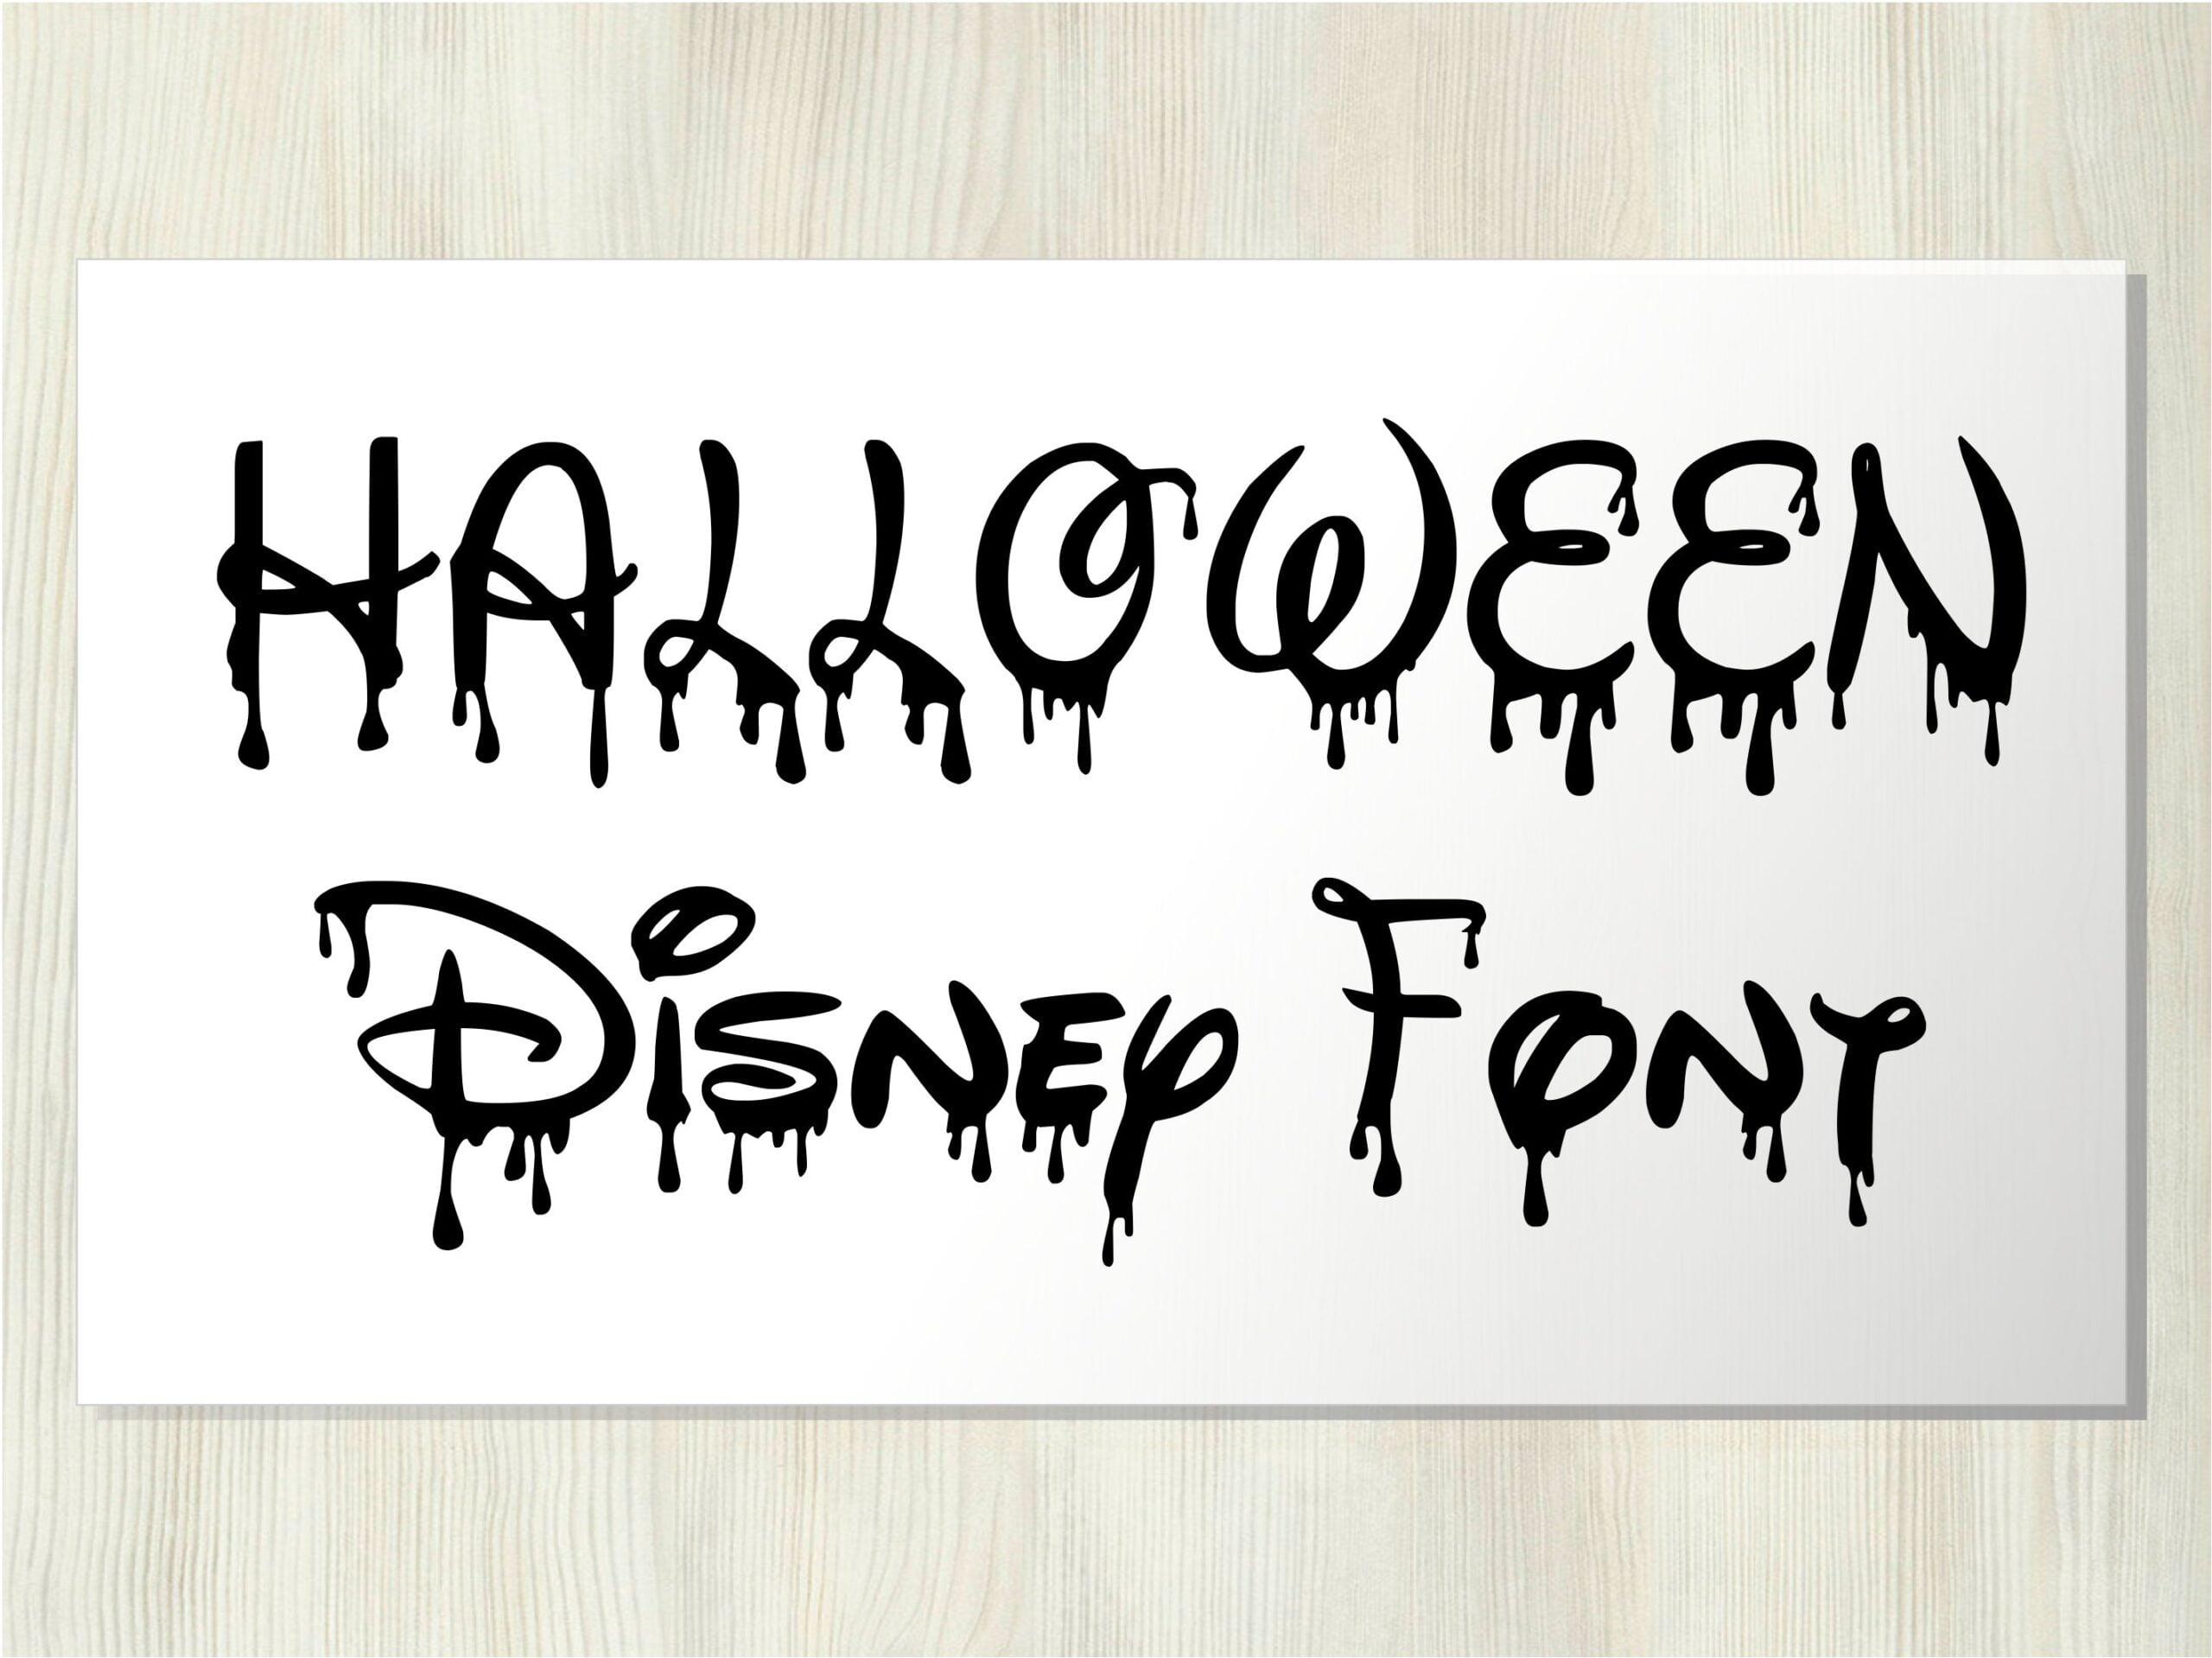 Halloween Bloody Dripping Font Otf Halloween Dripping Font Svg Halloween Bloody Dripping Letters Svg File For Cricut Bloody Dripping Font Dripping Font Vectorency